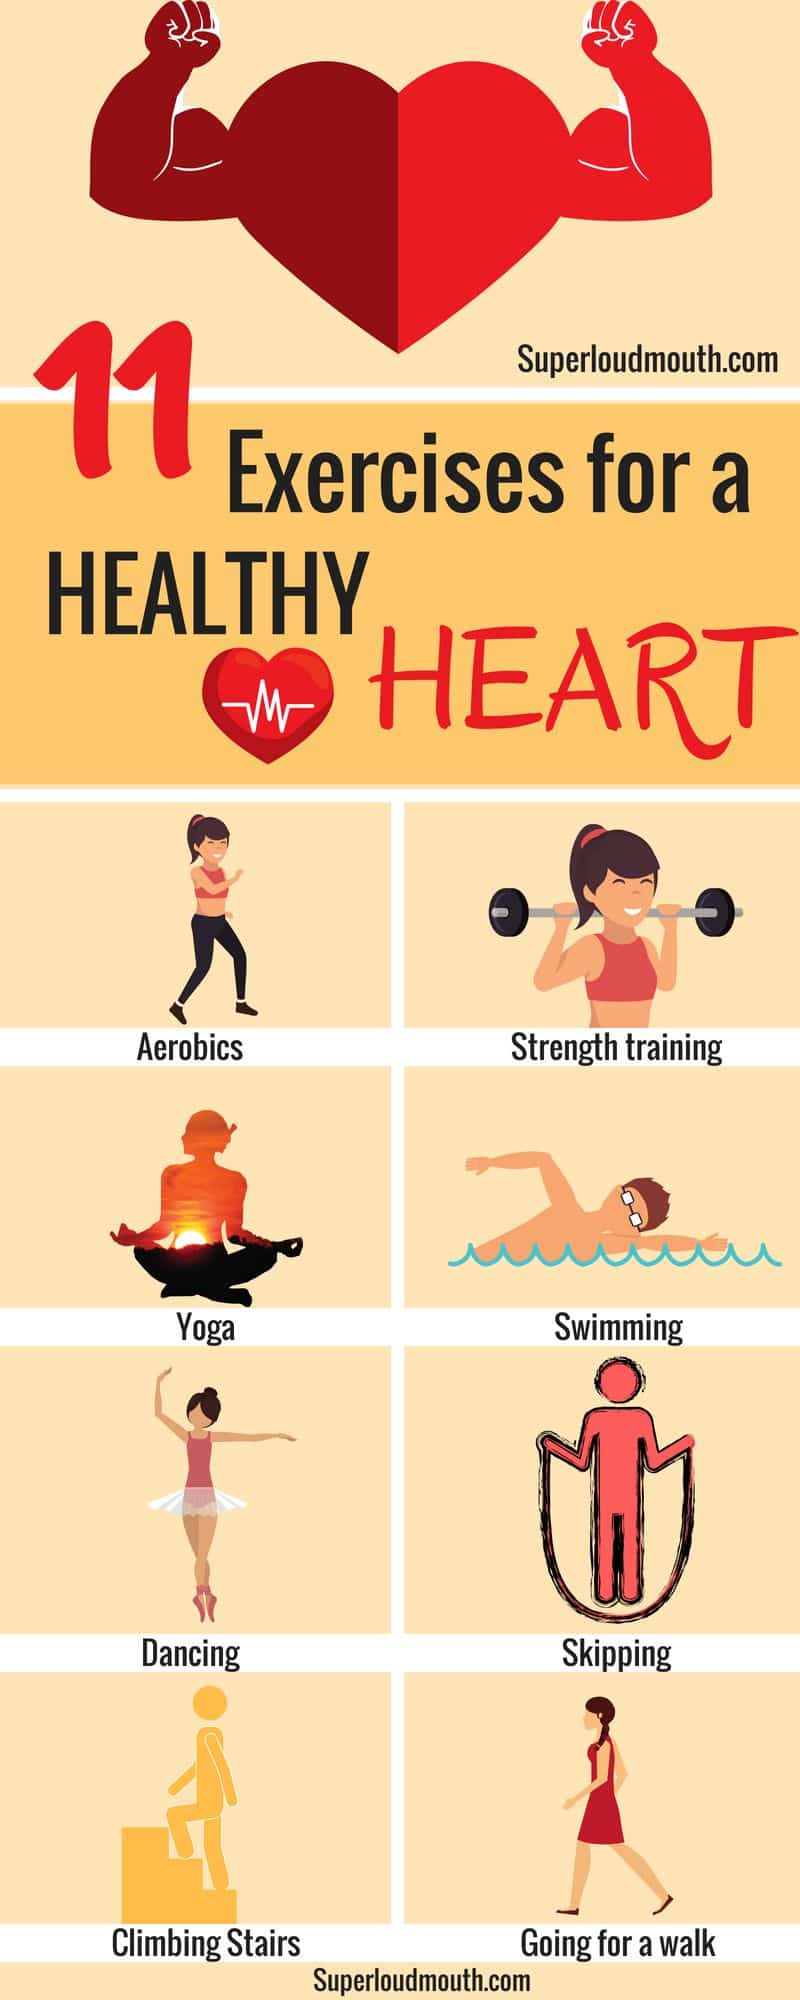 exercise-for-a-healthy-heart-2